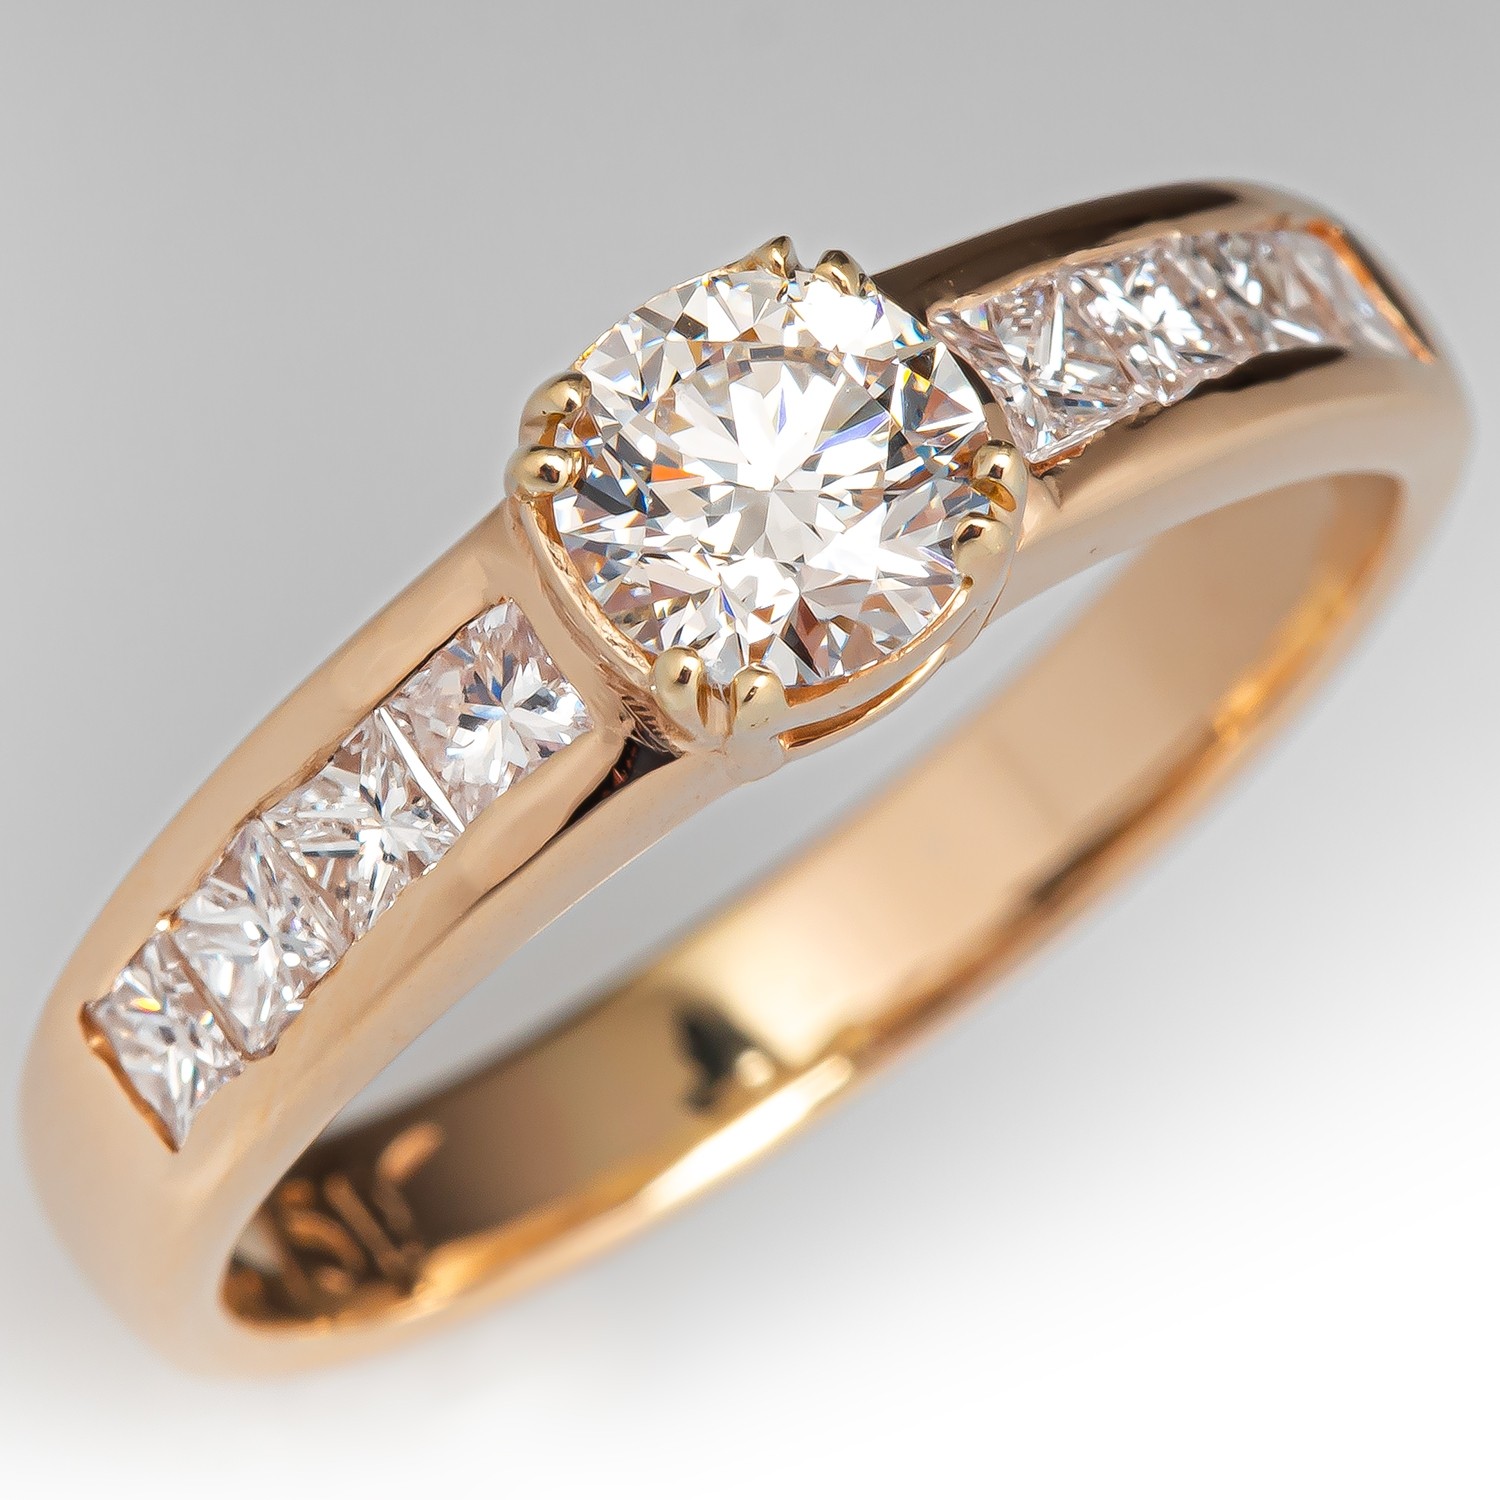 0.87 ct. Natural Diamond Engagement Ring in White Gold | Shane Co.